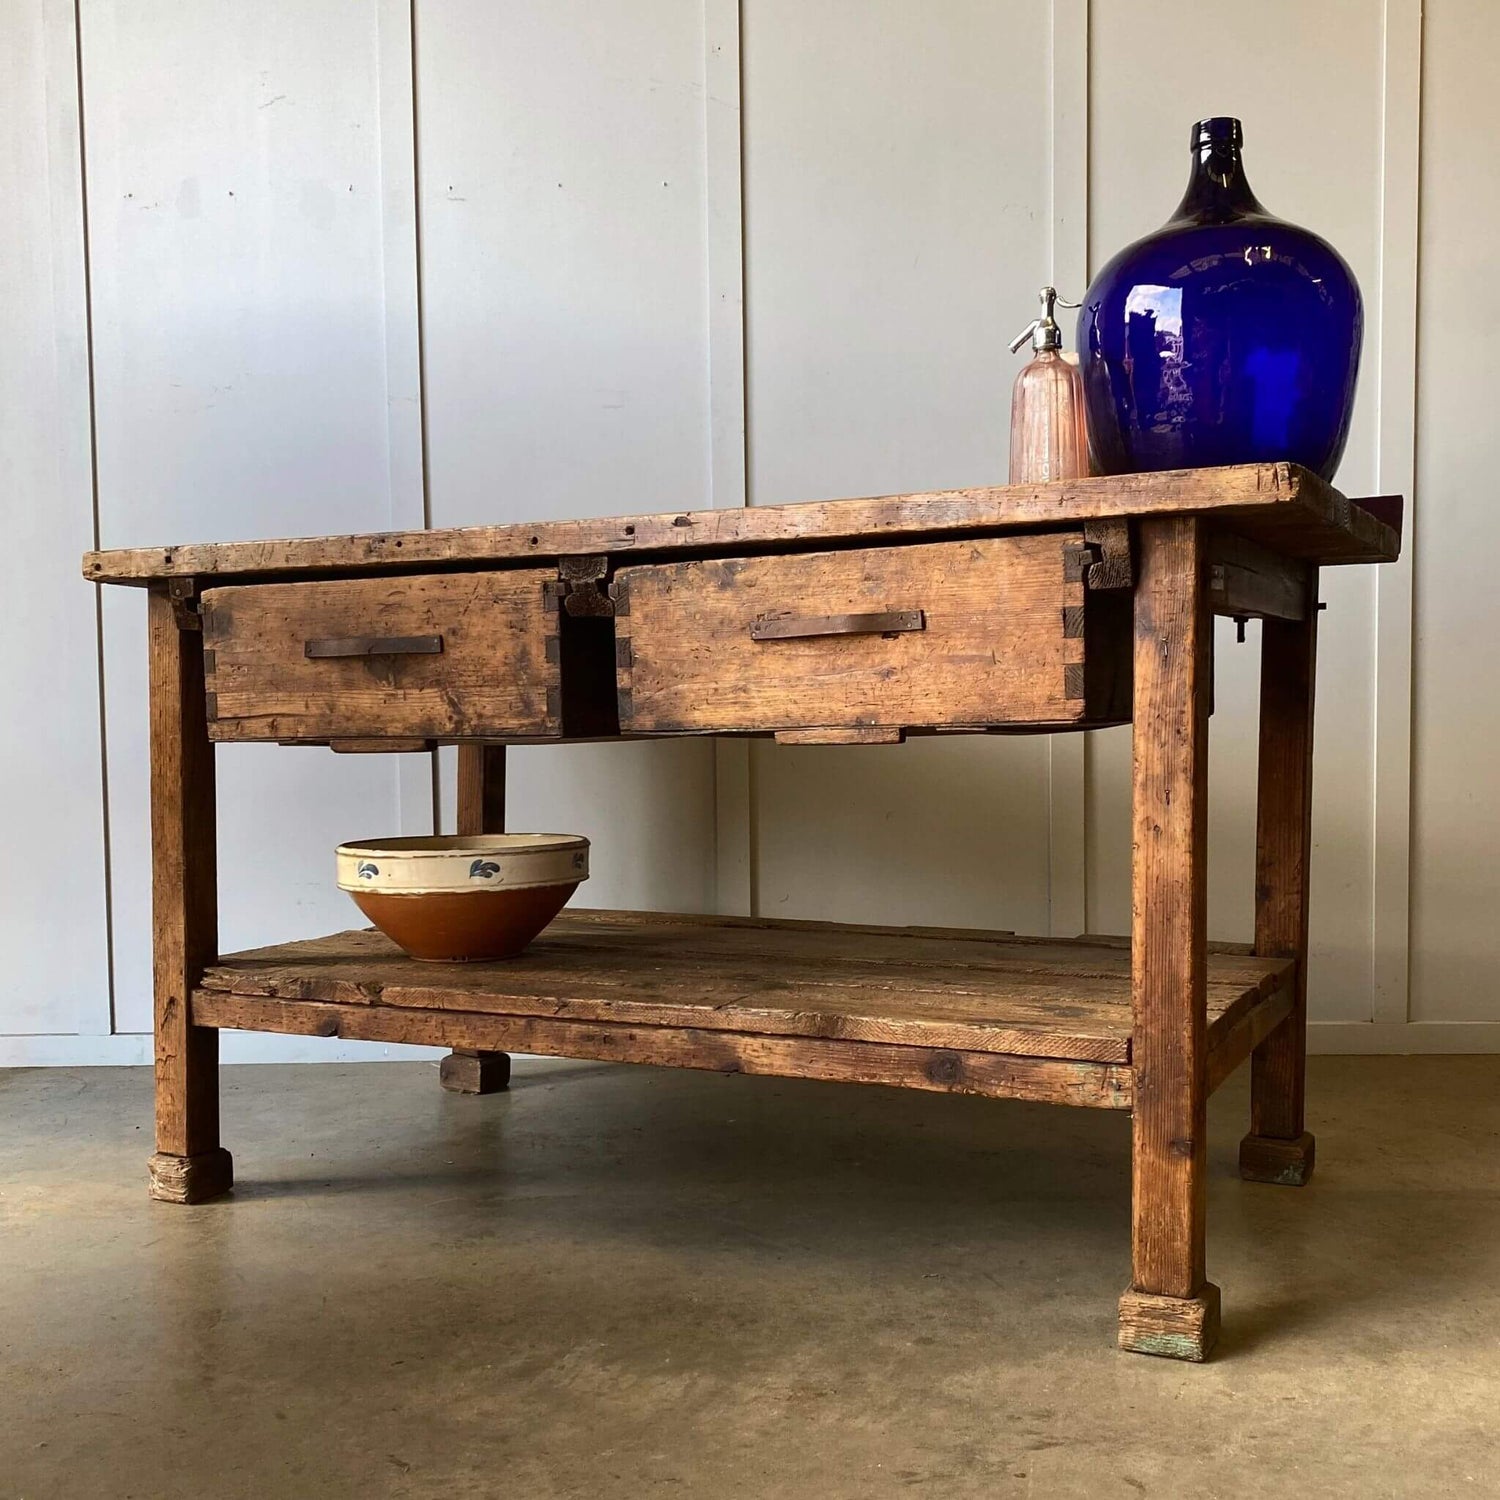 Antique table, work bench